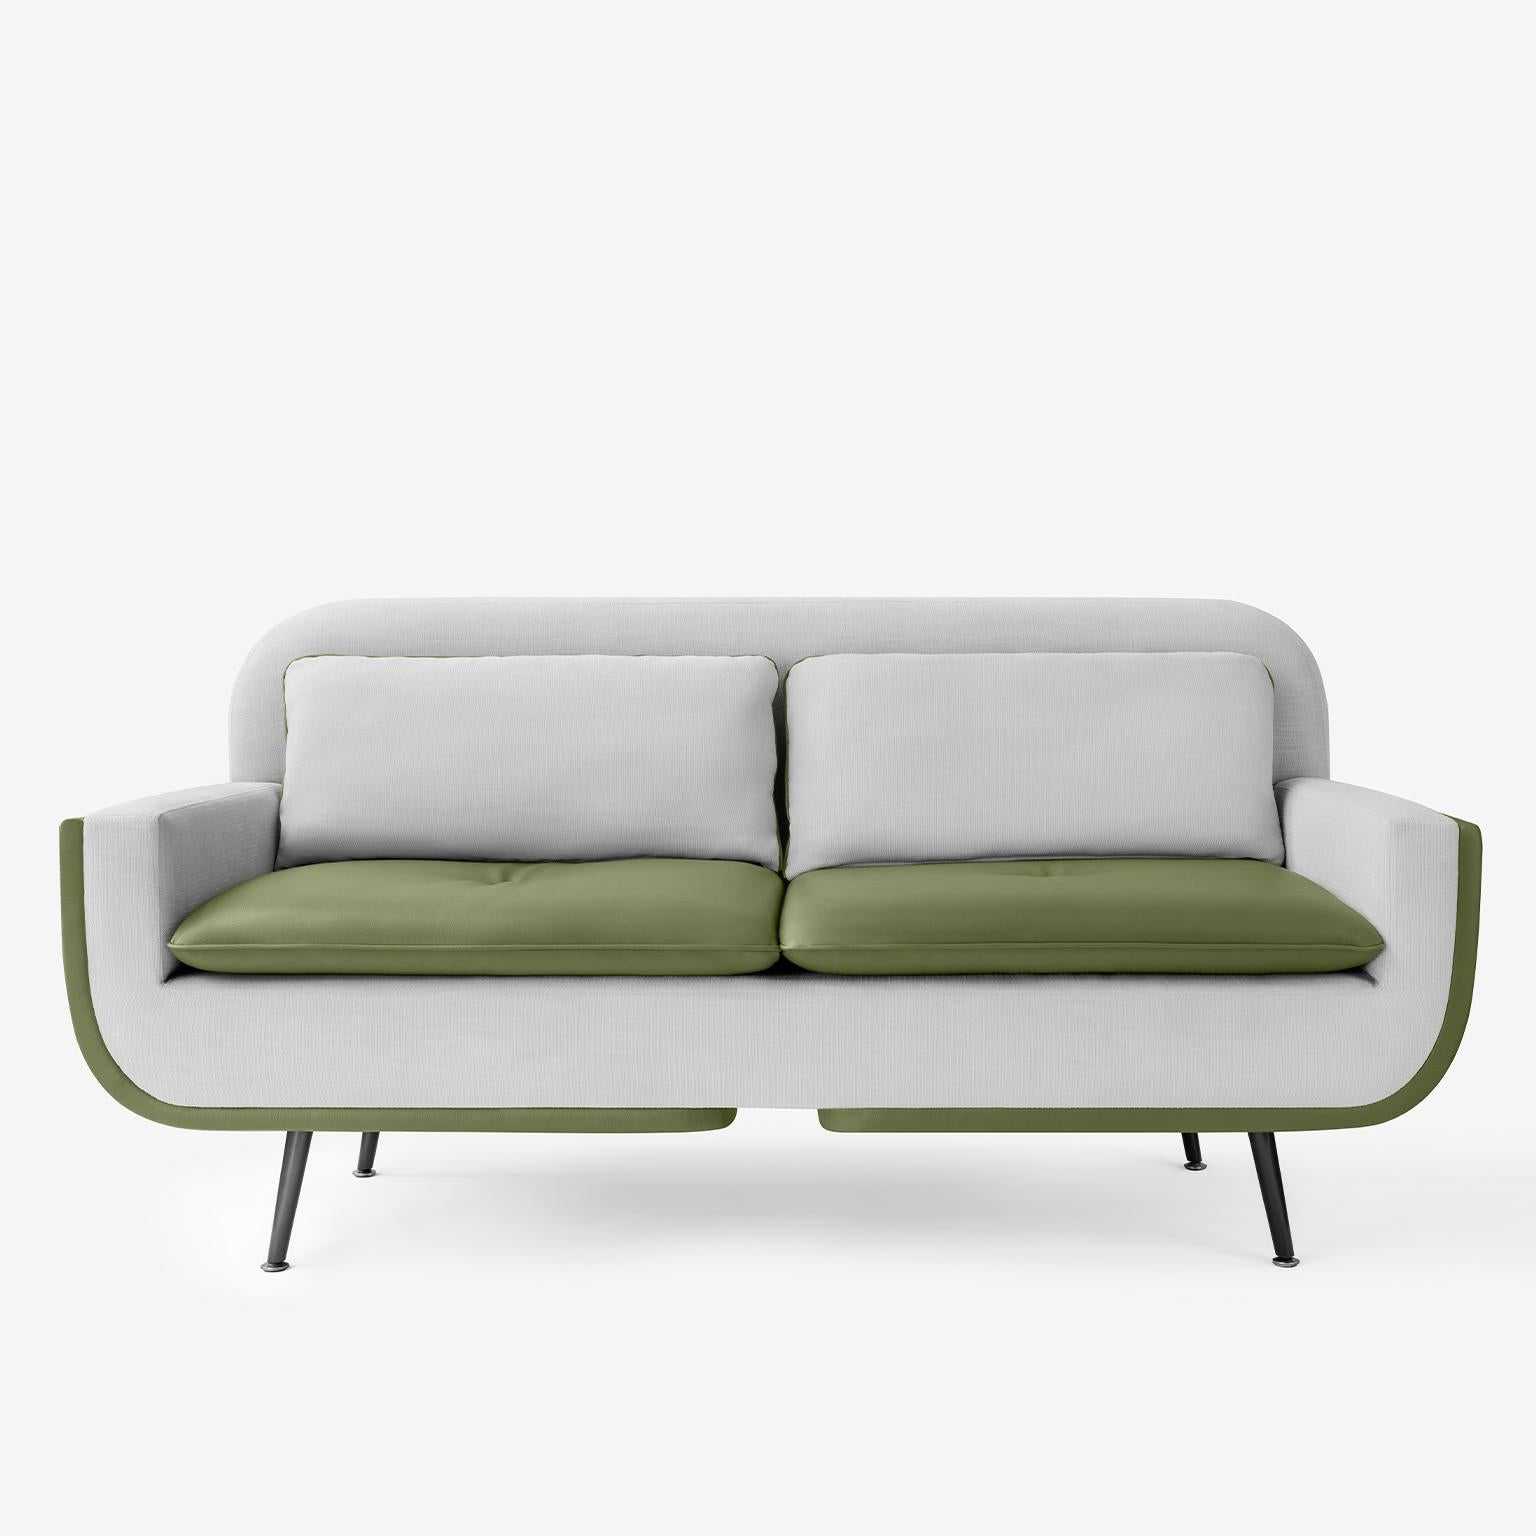 Designed to maximize both form and comfort, the Up two seater sofa will add a unique style to your space.

You can combine different fabrics for back and front of sofa or choose just one fabric. 

-Spring upholstery 
-32 DNS HR Foam
-1st Grade Alder